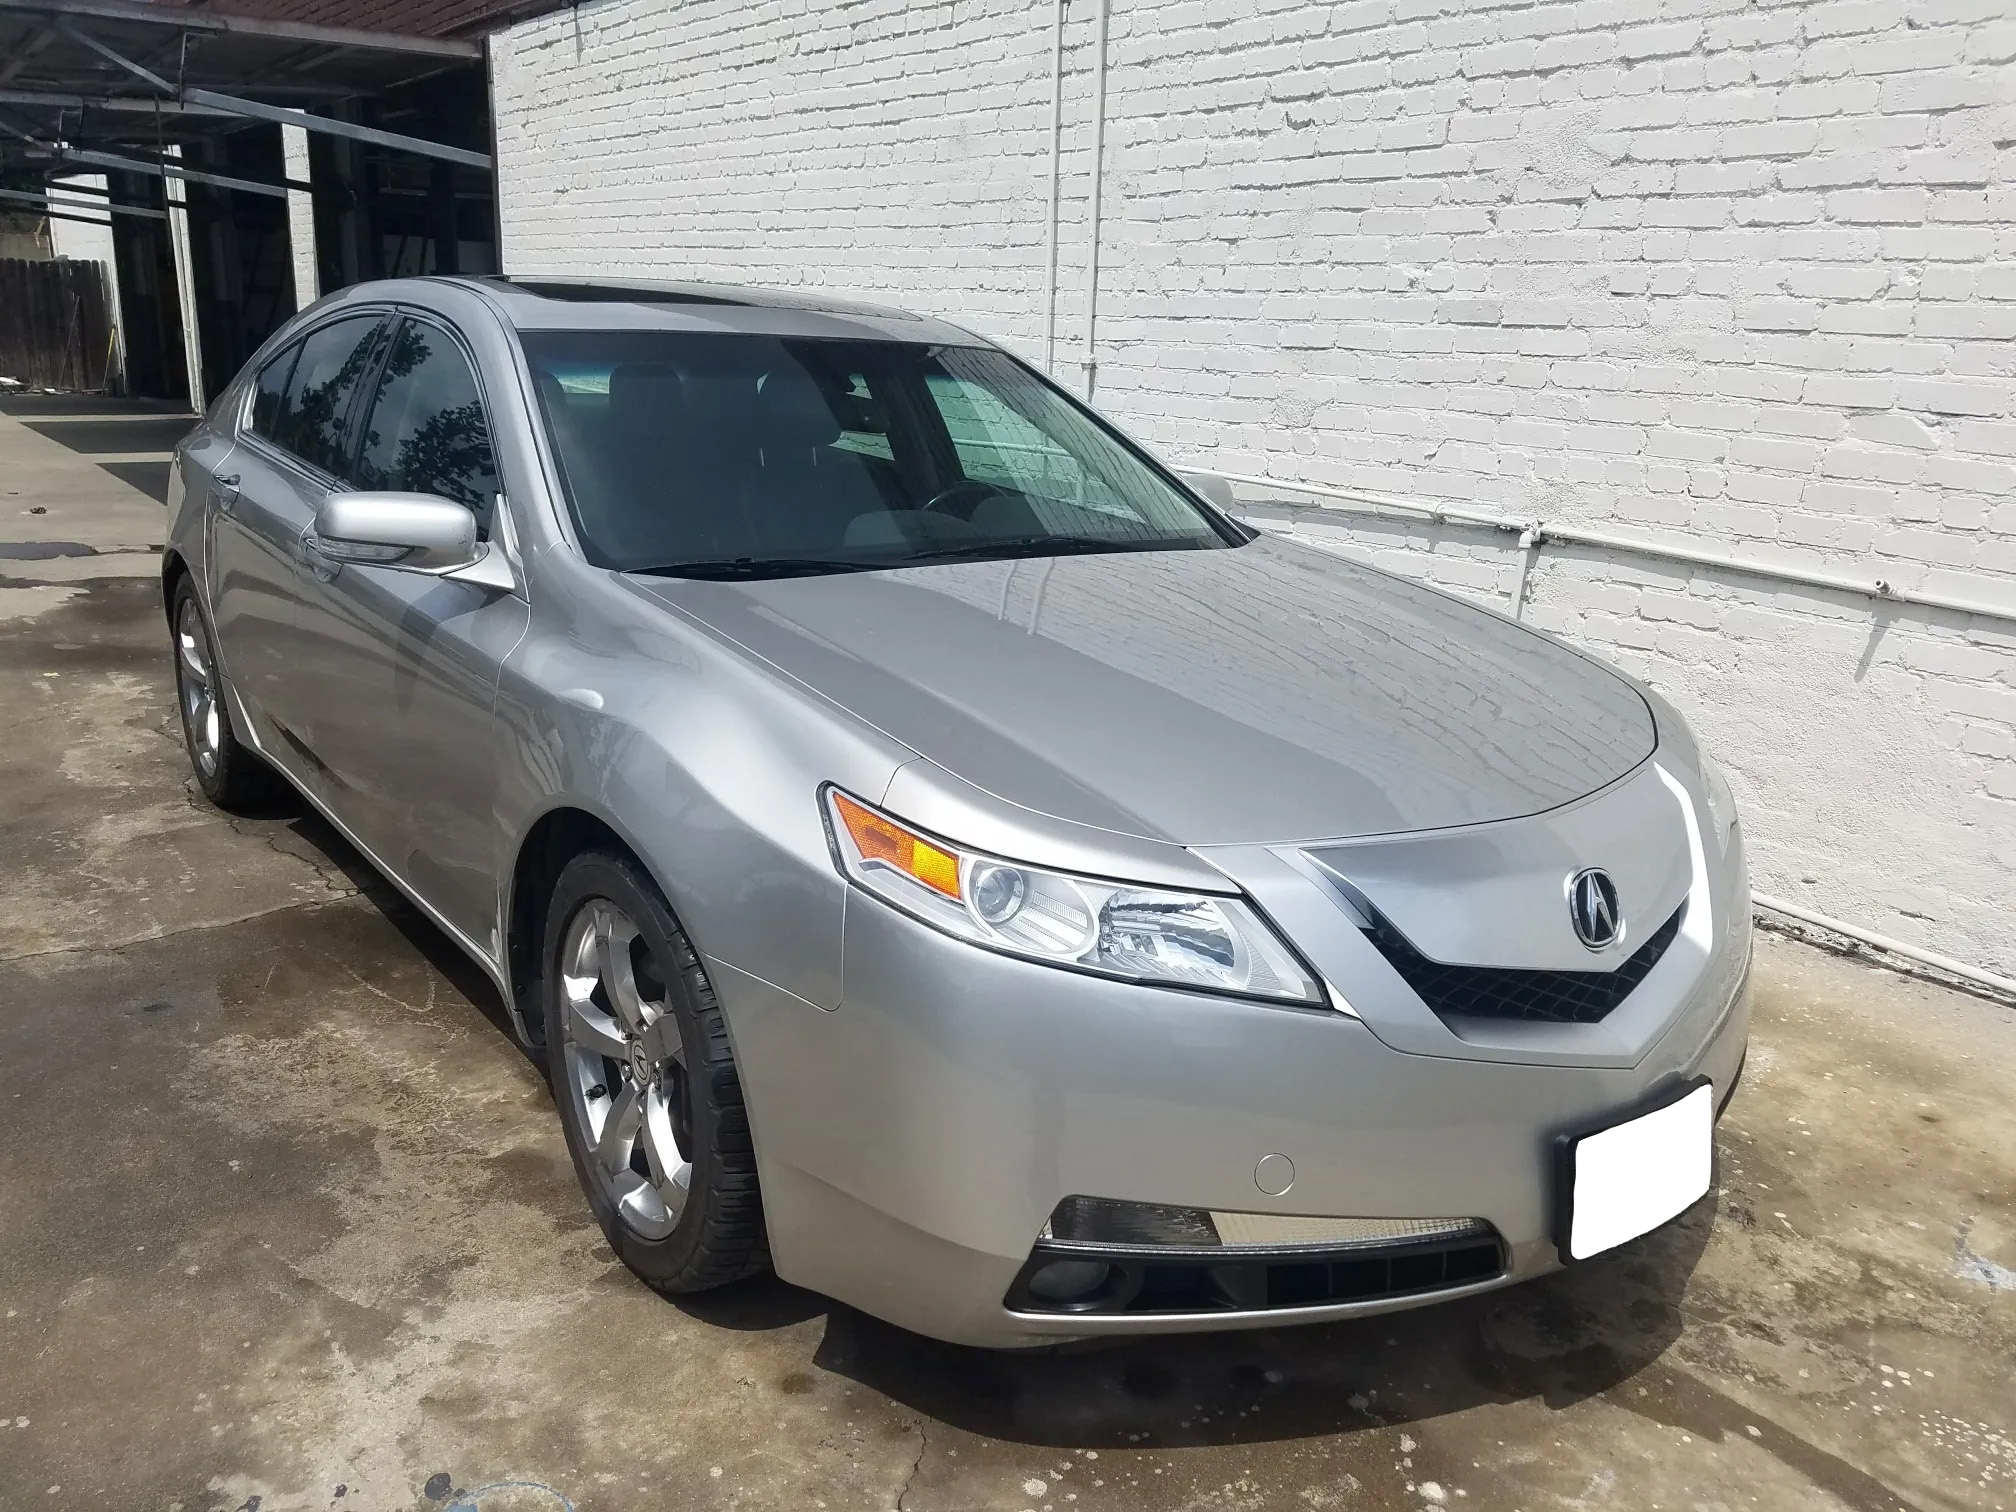 Acura-After